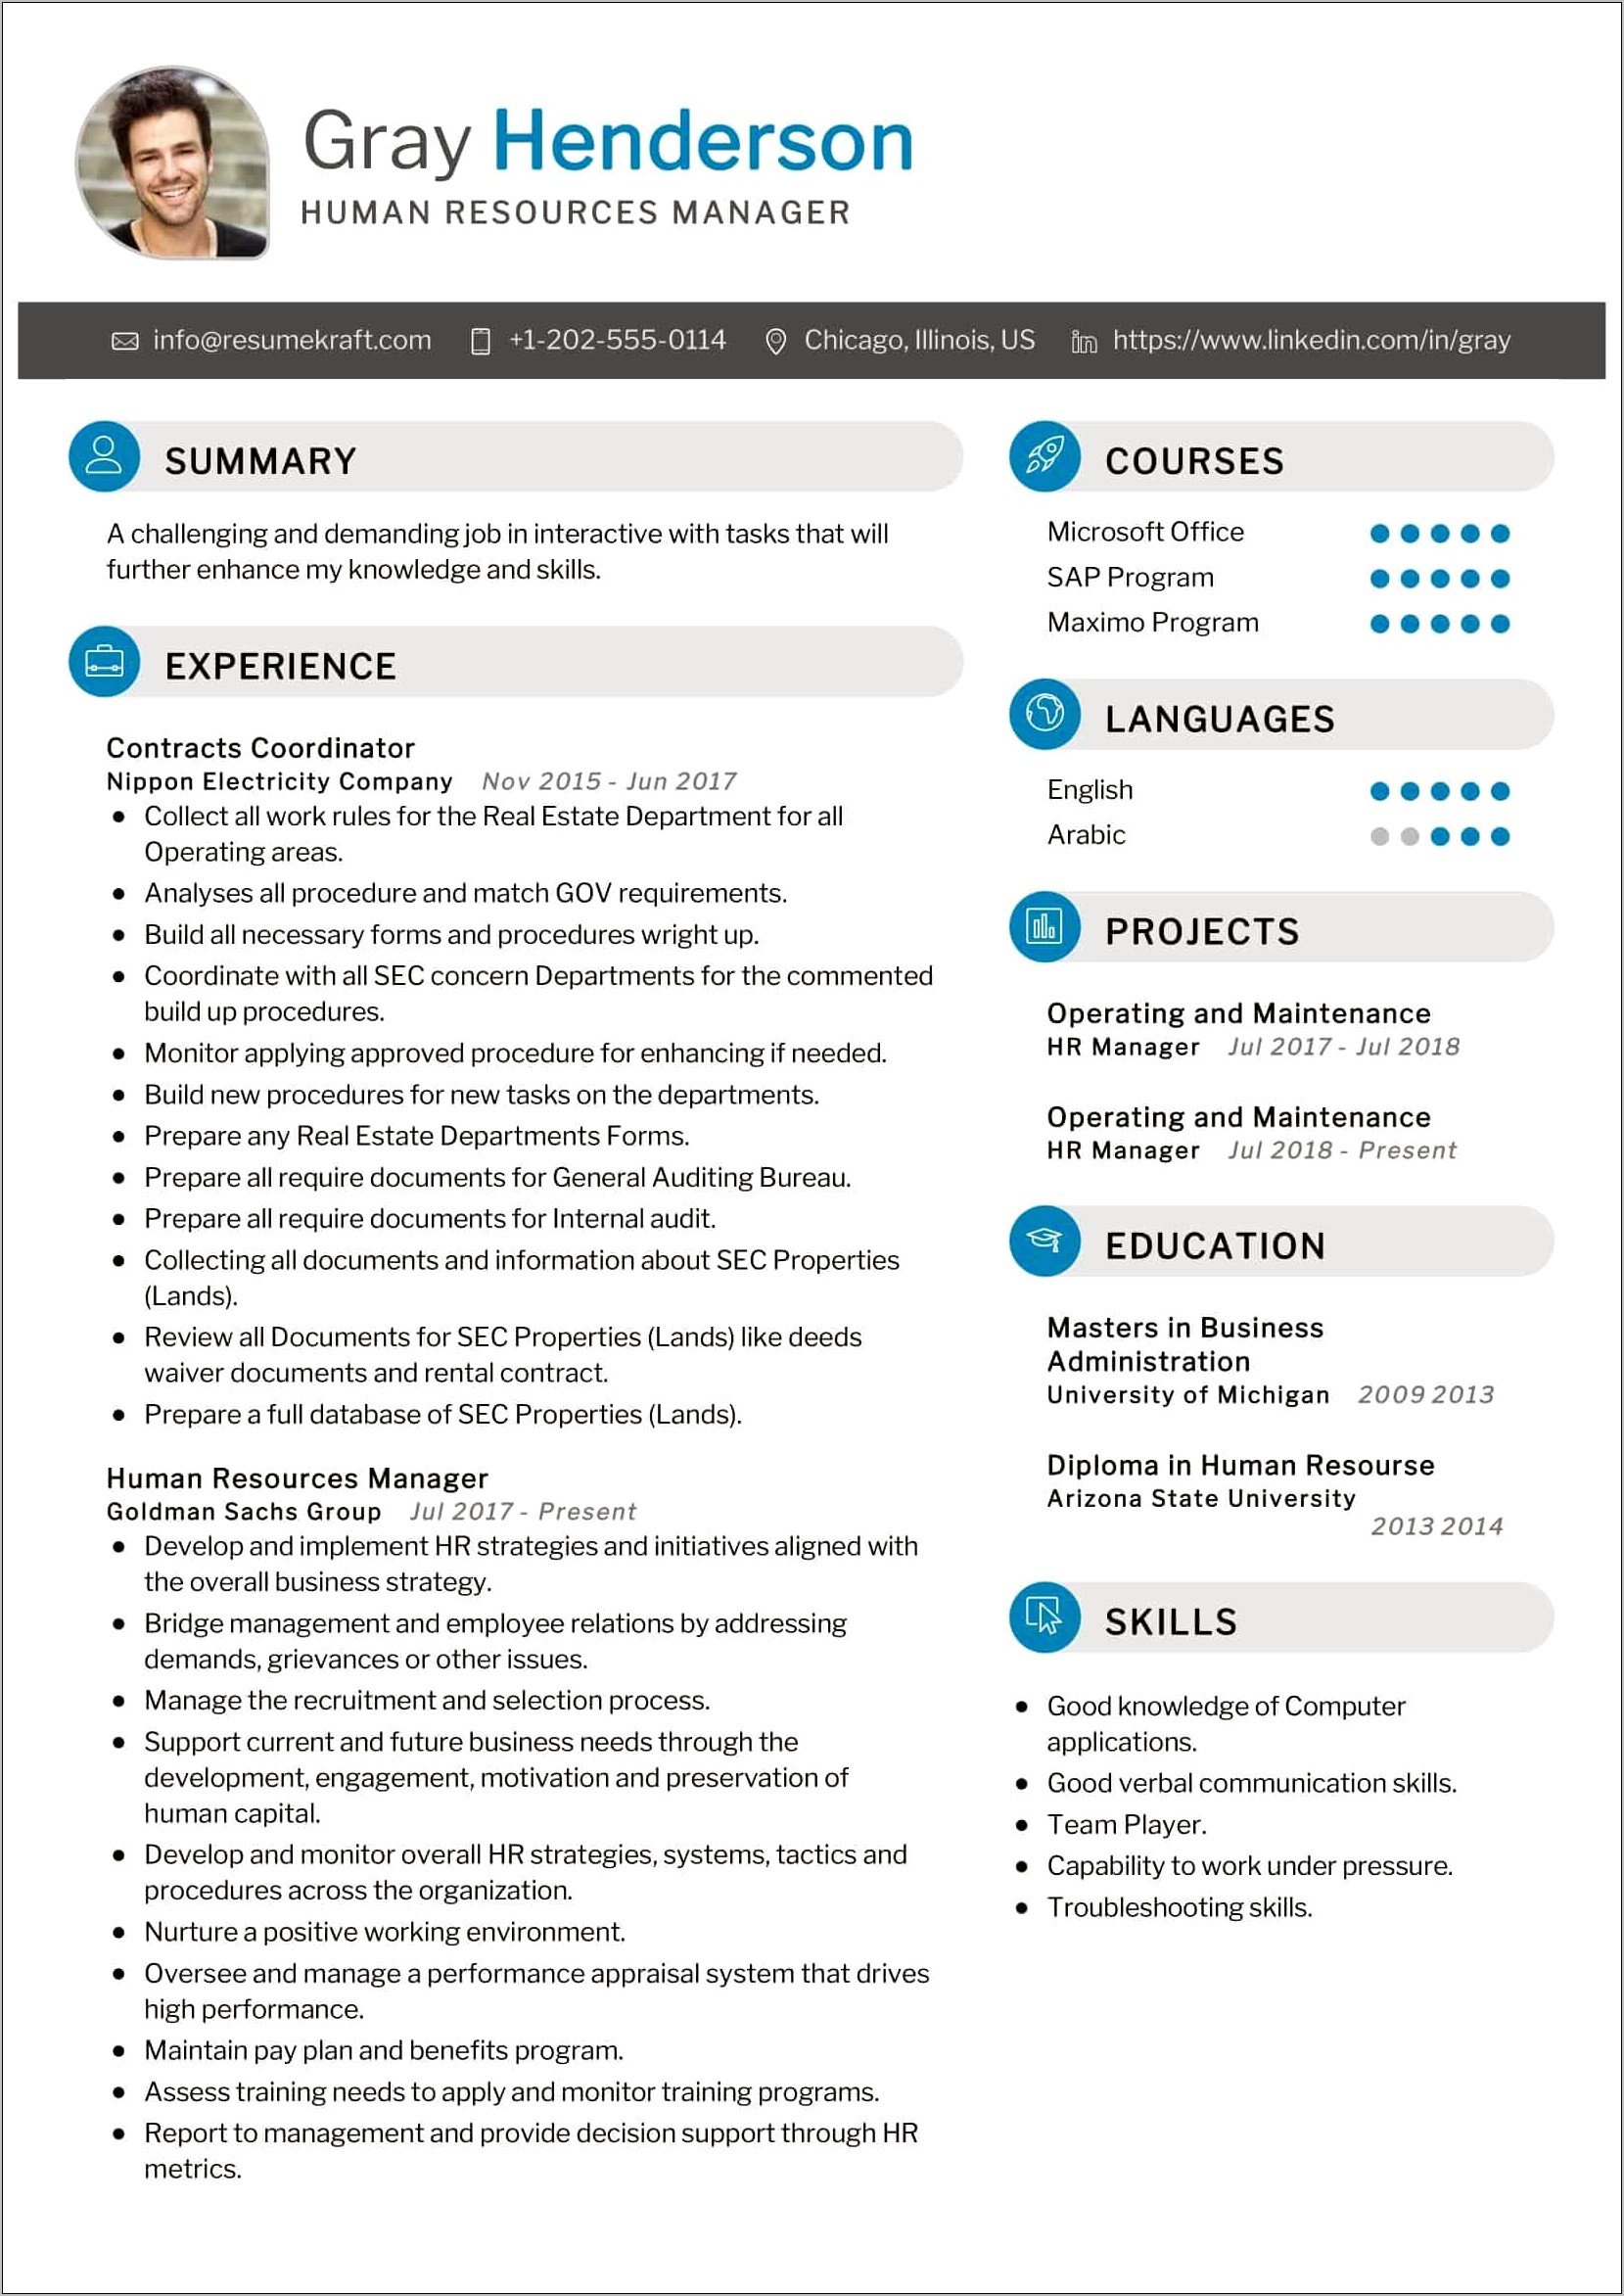 Resume Summary For Hr Manager